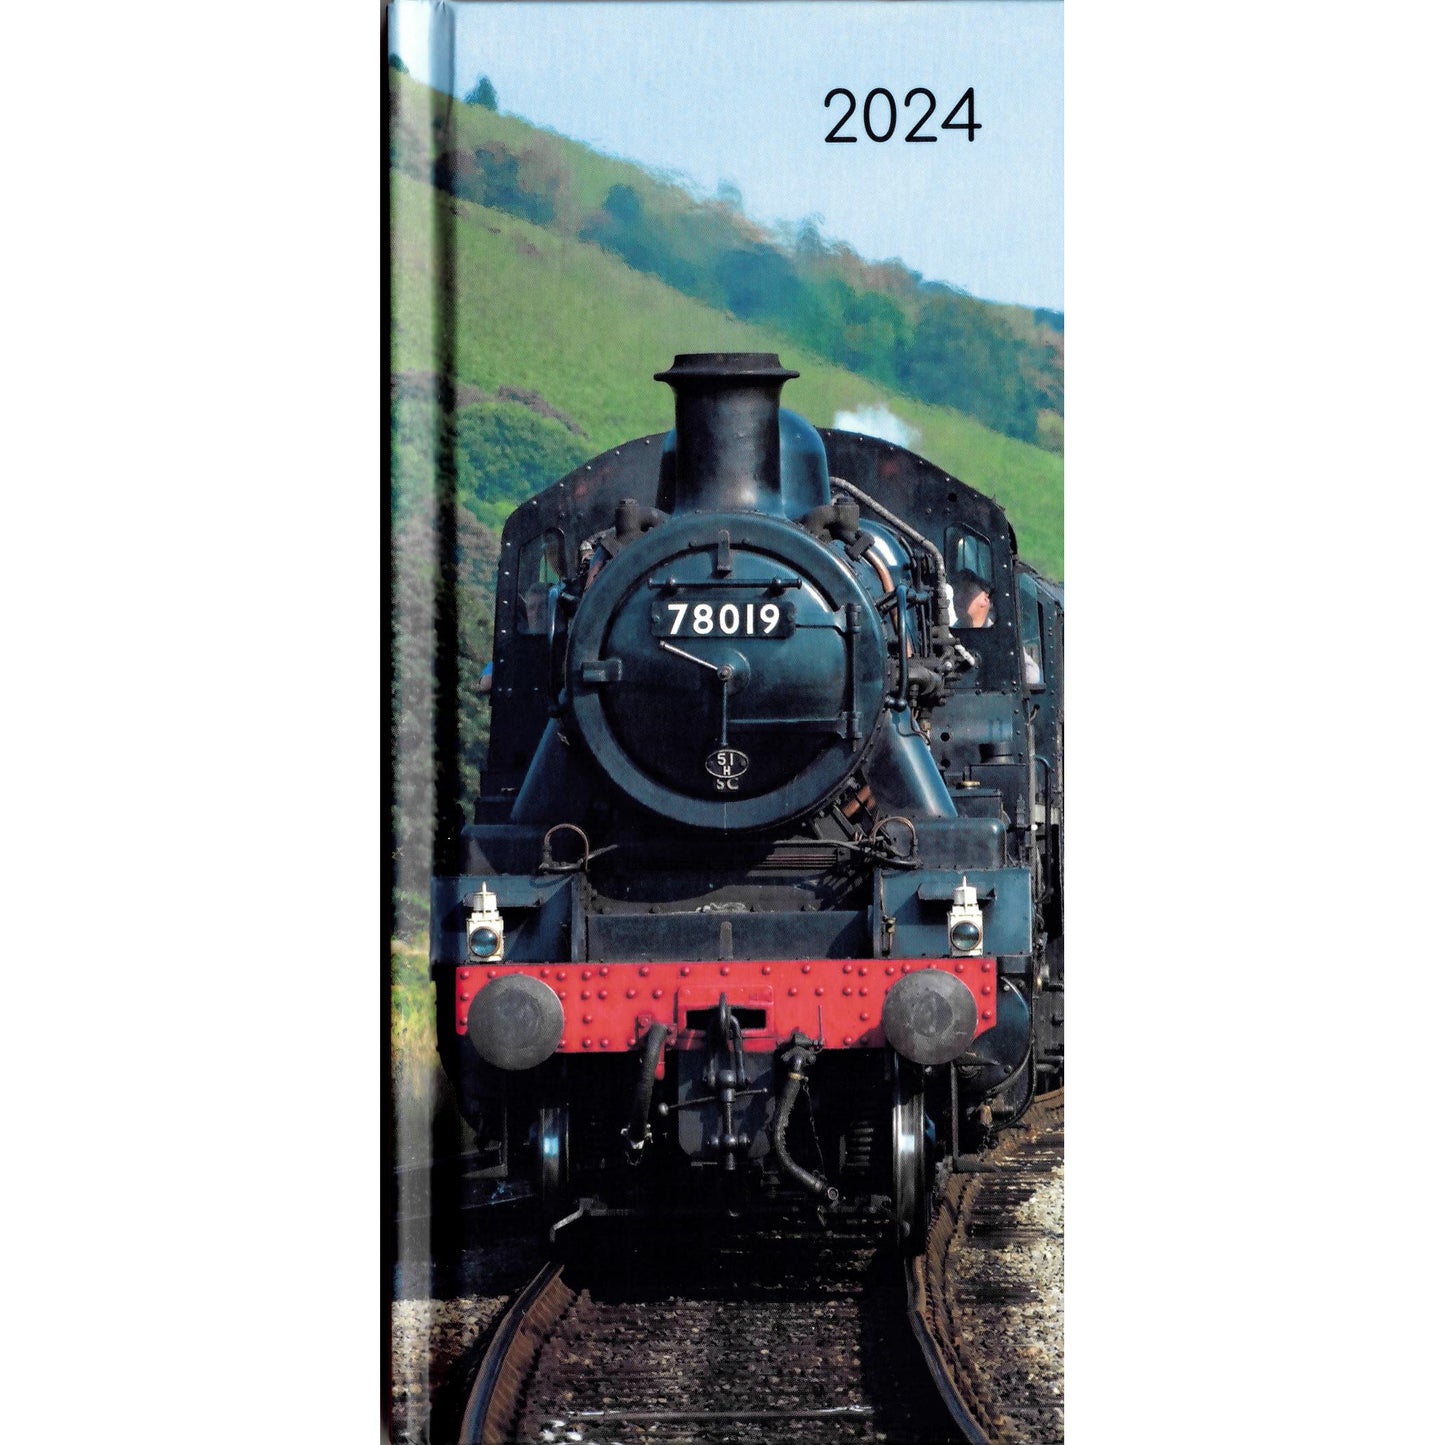 Front cover of the diary showing the front view of steam locomotive number 78019.